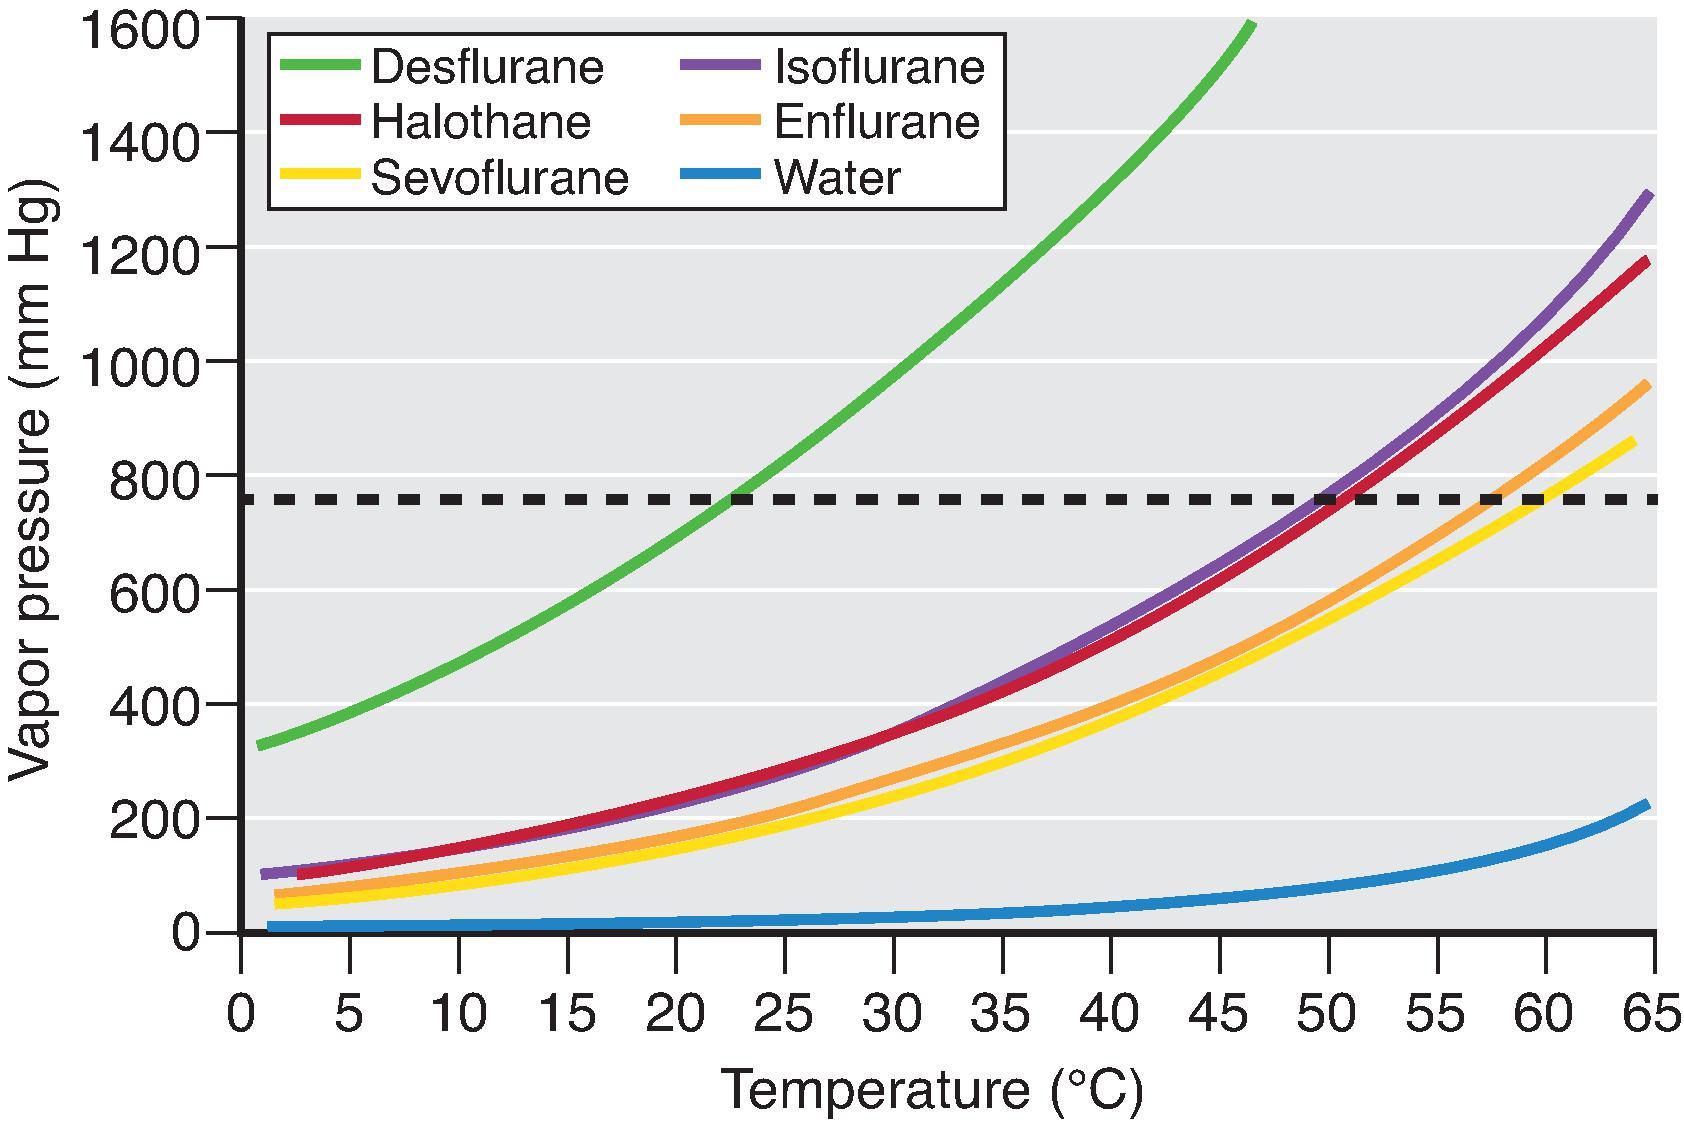 Fig. 15.3, Vapor pressure versus temperature curves for desflurane, isoflurane, halothane, enflurane, sevoflurane, and water. Note that the curve for desflurane differs dramatically from that of the other contemporary inhaled anesthetic agents. Also note that all inhaled agents are more volatile than water. Dashed line indicates 1 atm (760 mm Hg) of pressure, which illustrates the boiling point at sea level (normal boiling point). (From inhaled anesthetic package insert equations and Susay SR, Smith MA, Lockwood GG. The saturated vapor pressure of desflurane at various temperatures. Anesth Analg. 1996;83:864–866.)